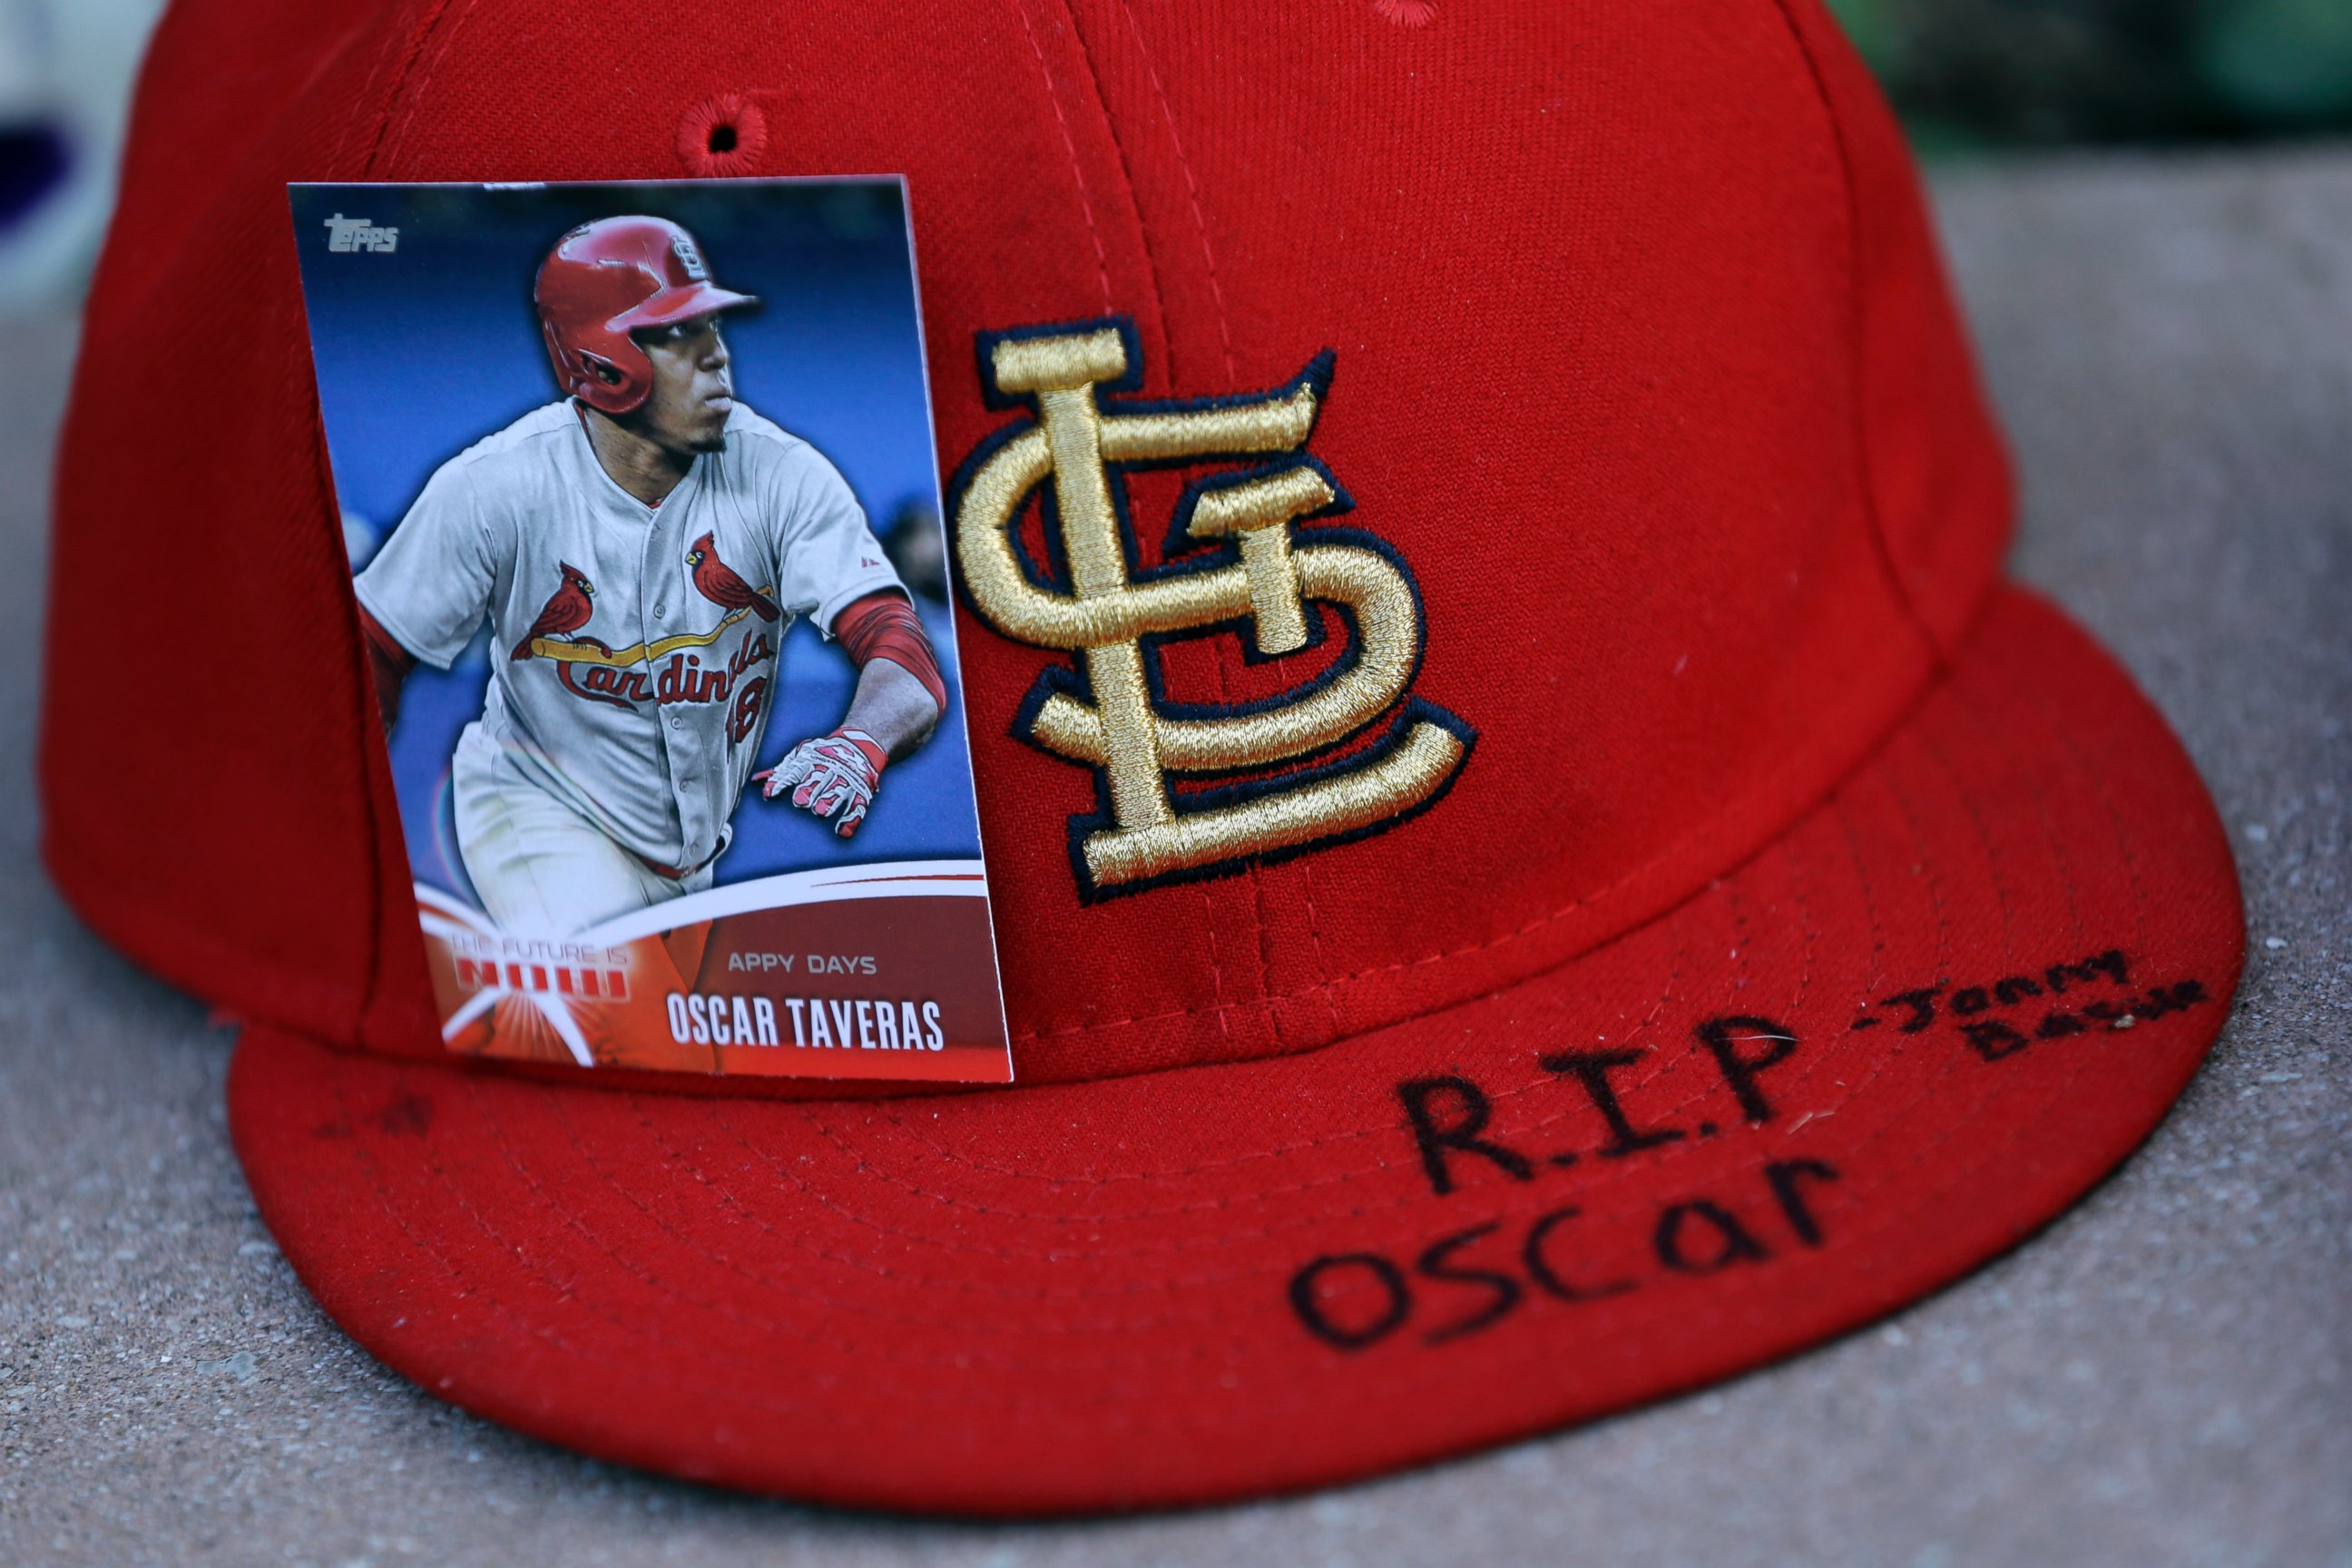 A baseball card showing St. Louis Cardinals' Oscar Taveras is attached to a hat as part of a makeshift memorial outside Busch Stadium, Oct. 27, 2014, in St. Louis.